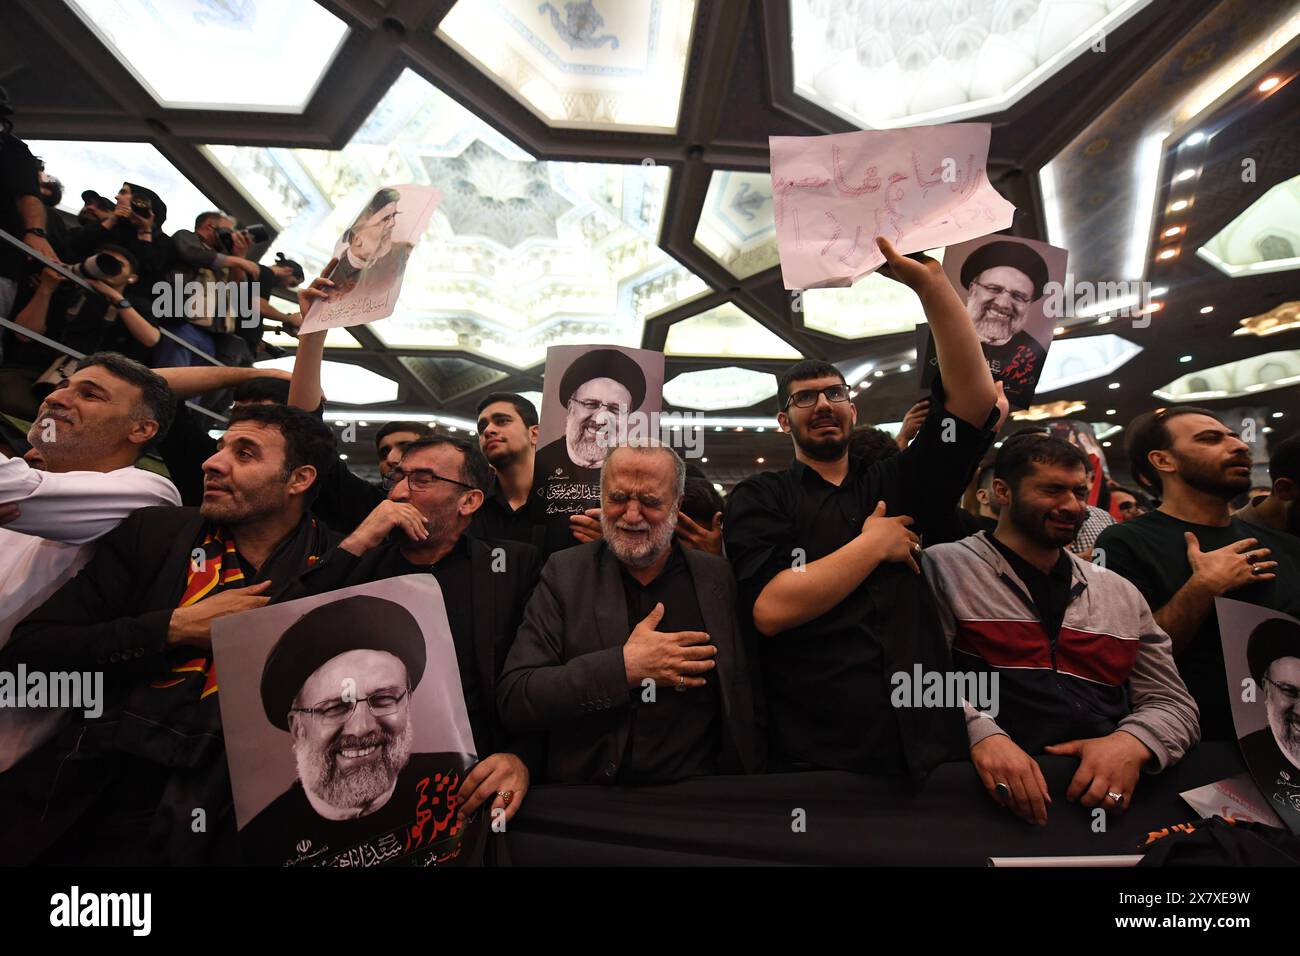 Tehran, Foreign Minister Hossein Amir-Abdollahian and others in Tehran. 21st May, 2024. People attend a farewell ceremony held for Iran's late President Ebrahim Raisi, late Foreign Minister Hossein Amir-Abdollahian and others in Tehran, May 21, 2024. People in Tehran on Tuesday attended, in large numbers, a farewell ceremony held for Iran's late President Ebrahim Raisi, late Foreign Minister Hossein Amir-Abdollahian and others after their bodies were transferred from the northwestern city of Tabriz to the capital city. Credit: Shadati/Xinhua/Alamy Live News Stock Photo